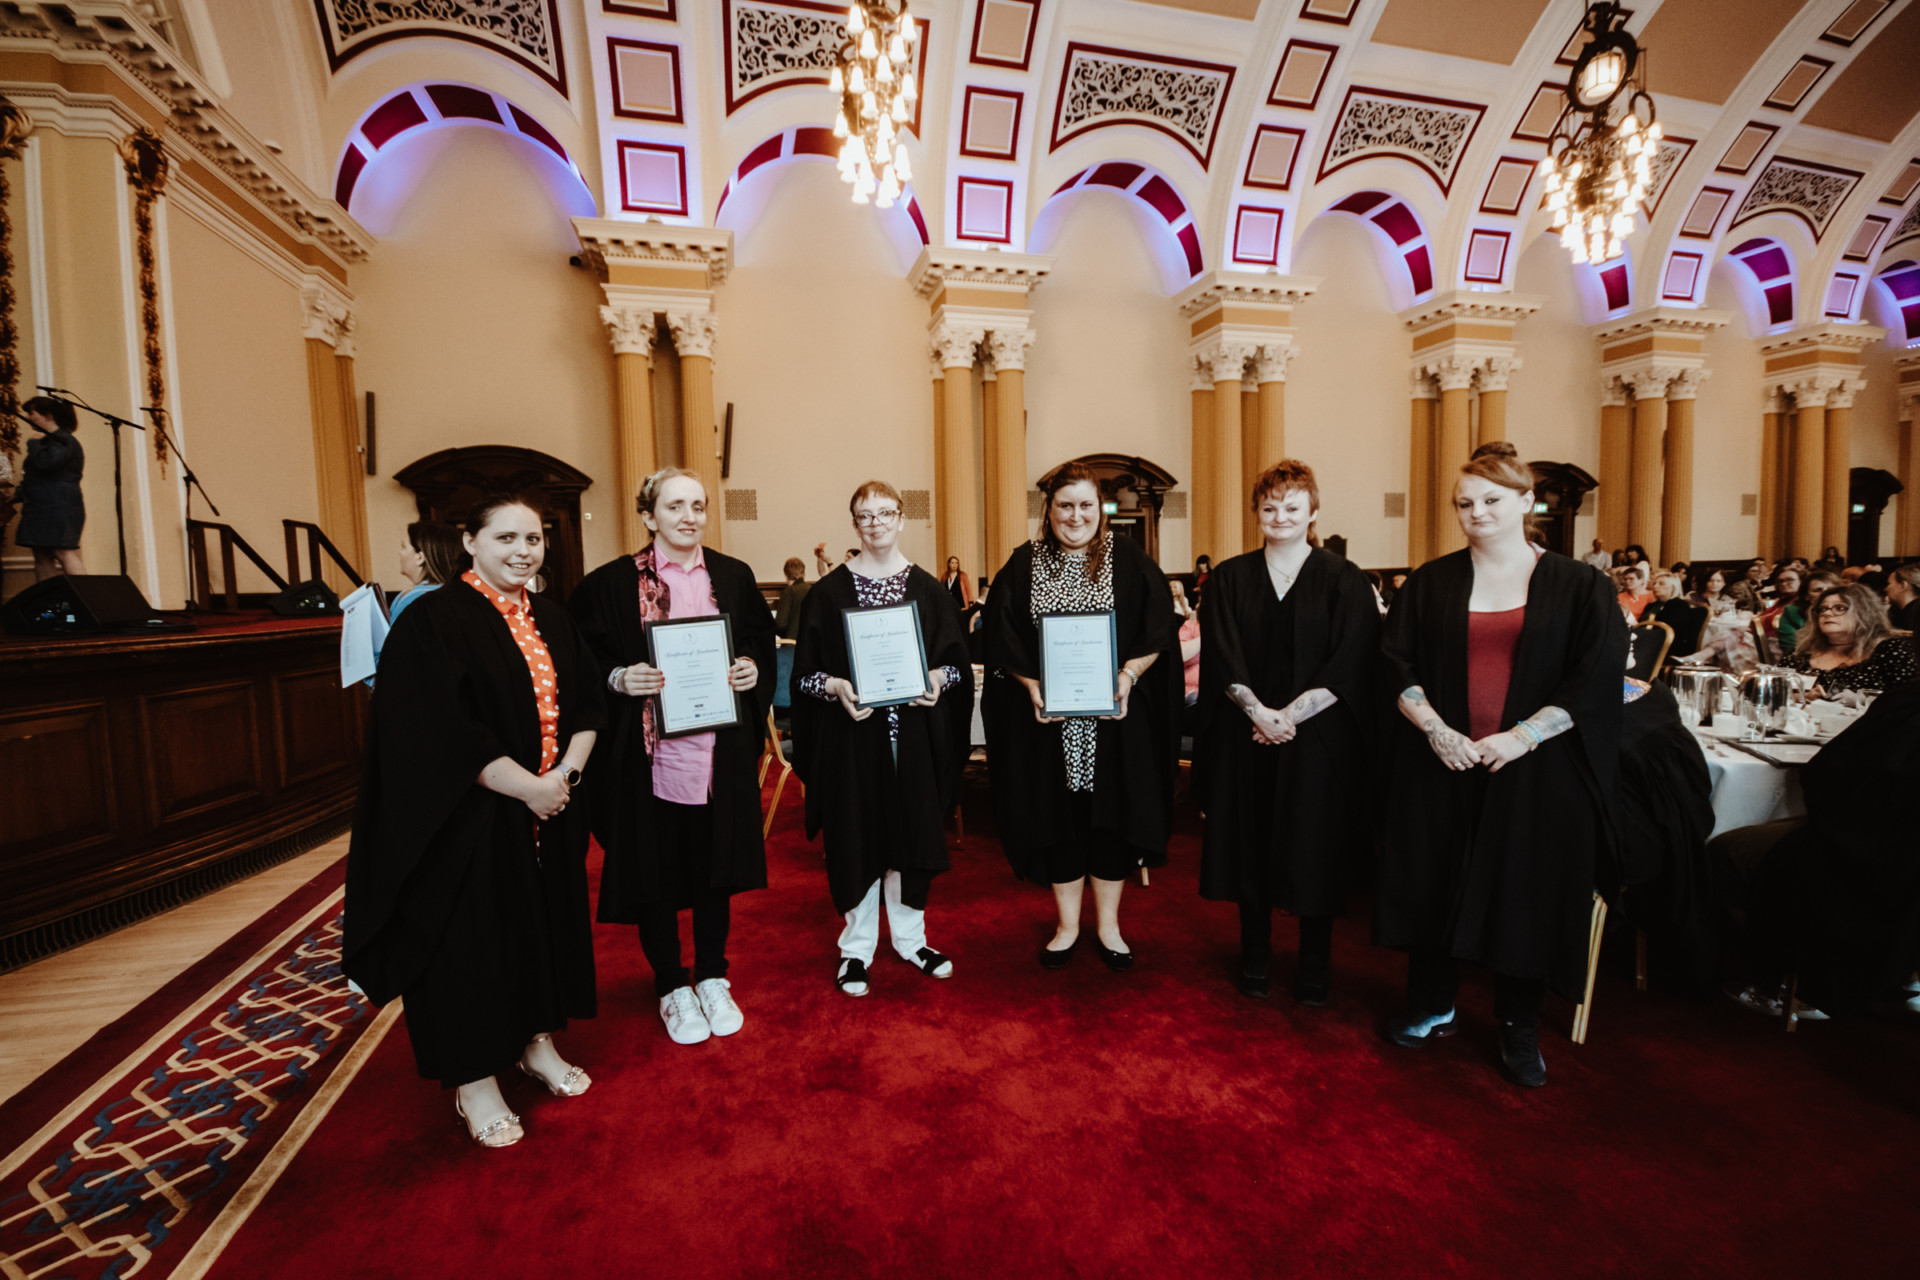 Graduation celebration for Tyrone students with learning difficulties